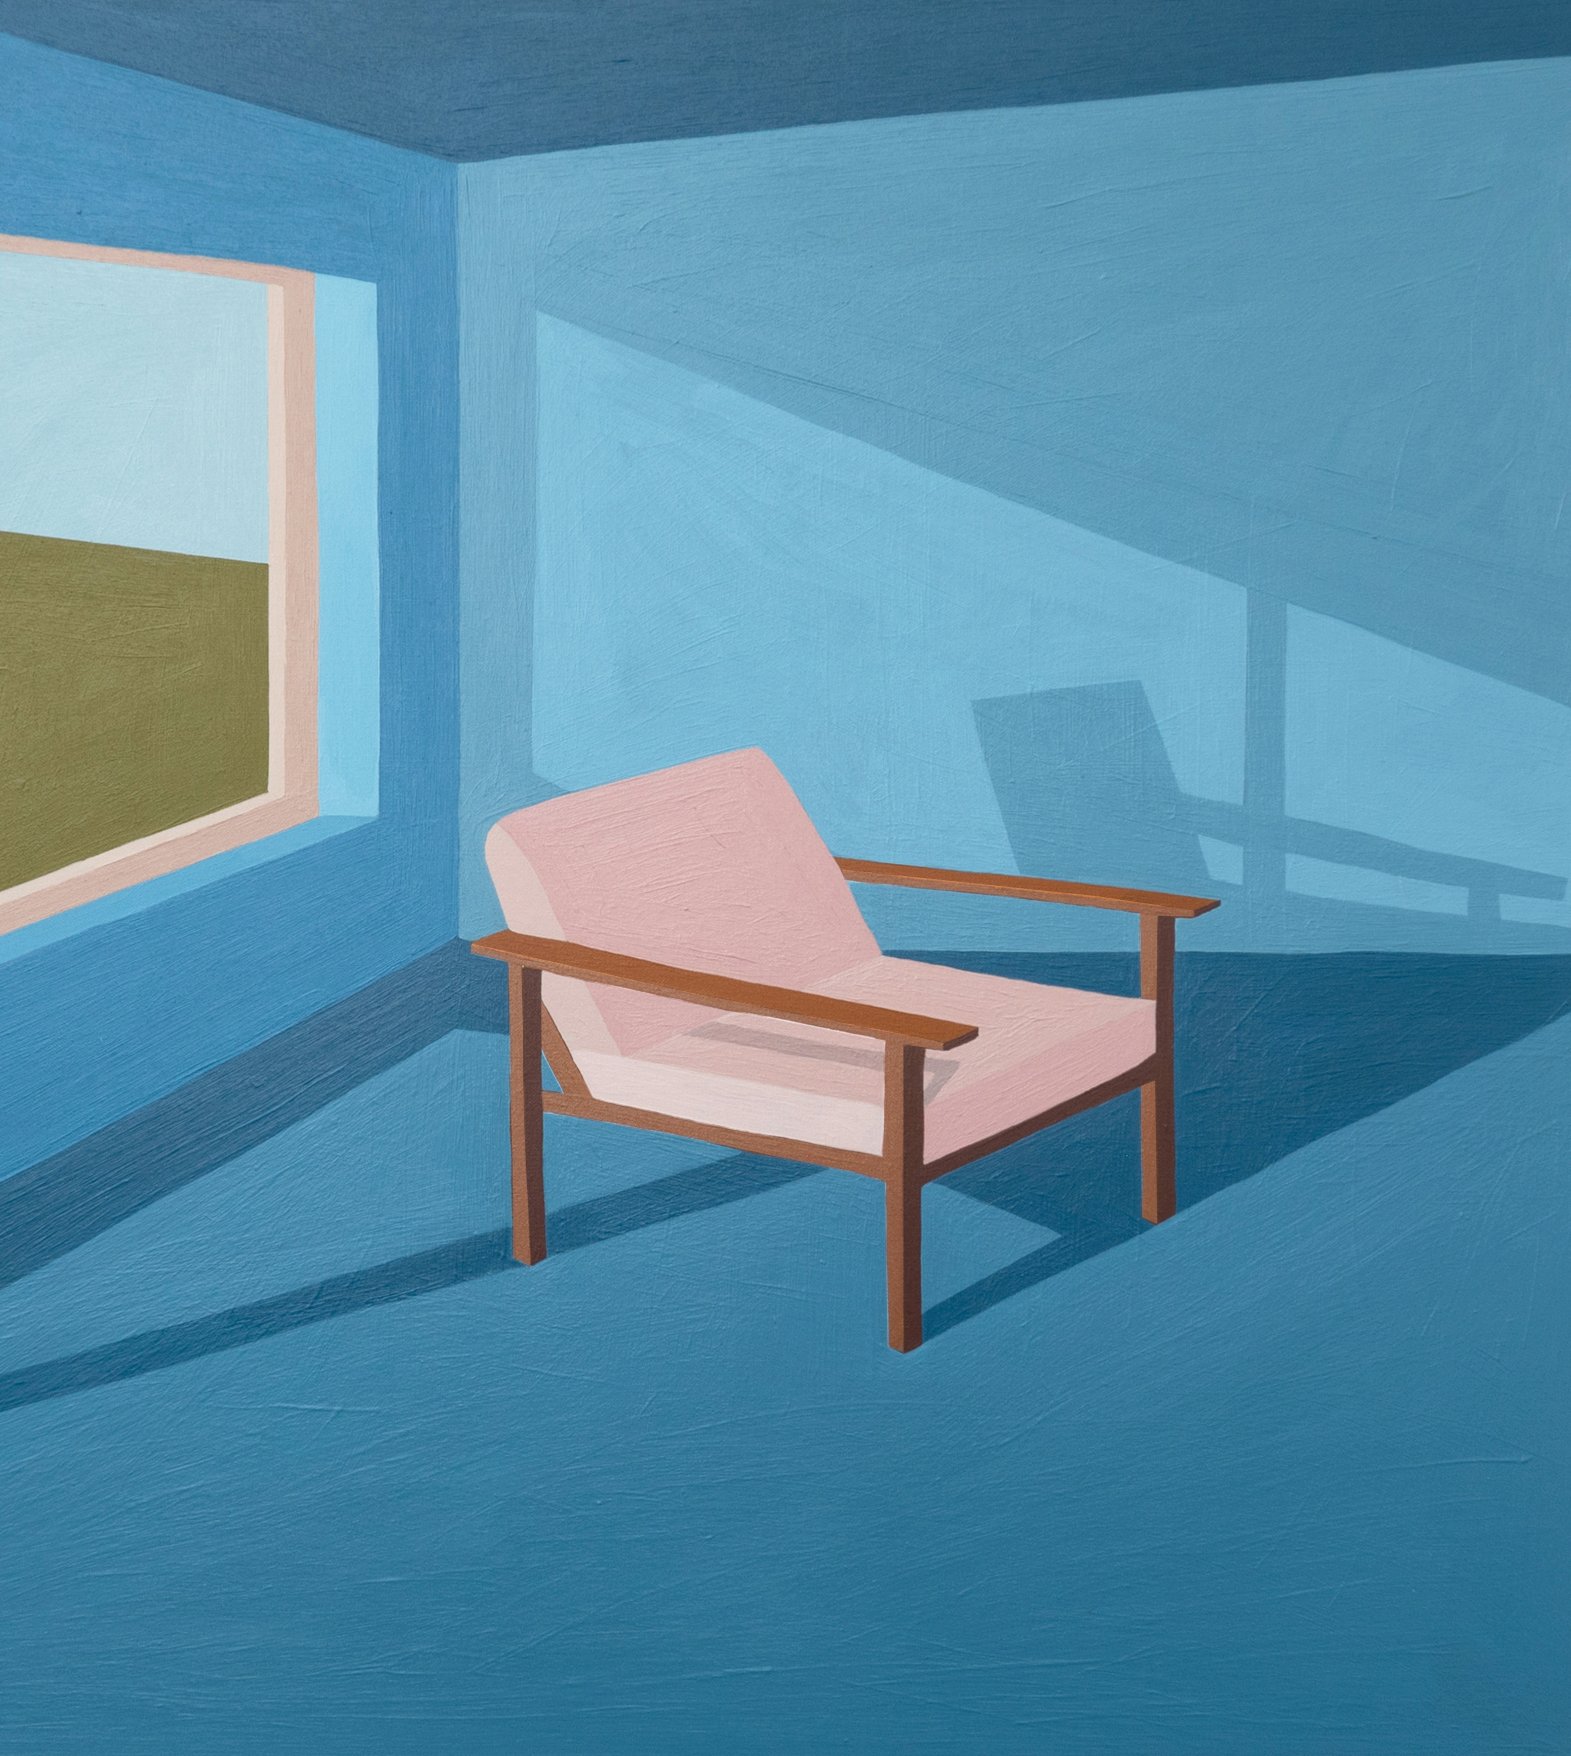 Blue room with chair